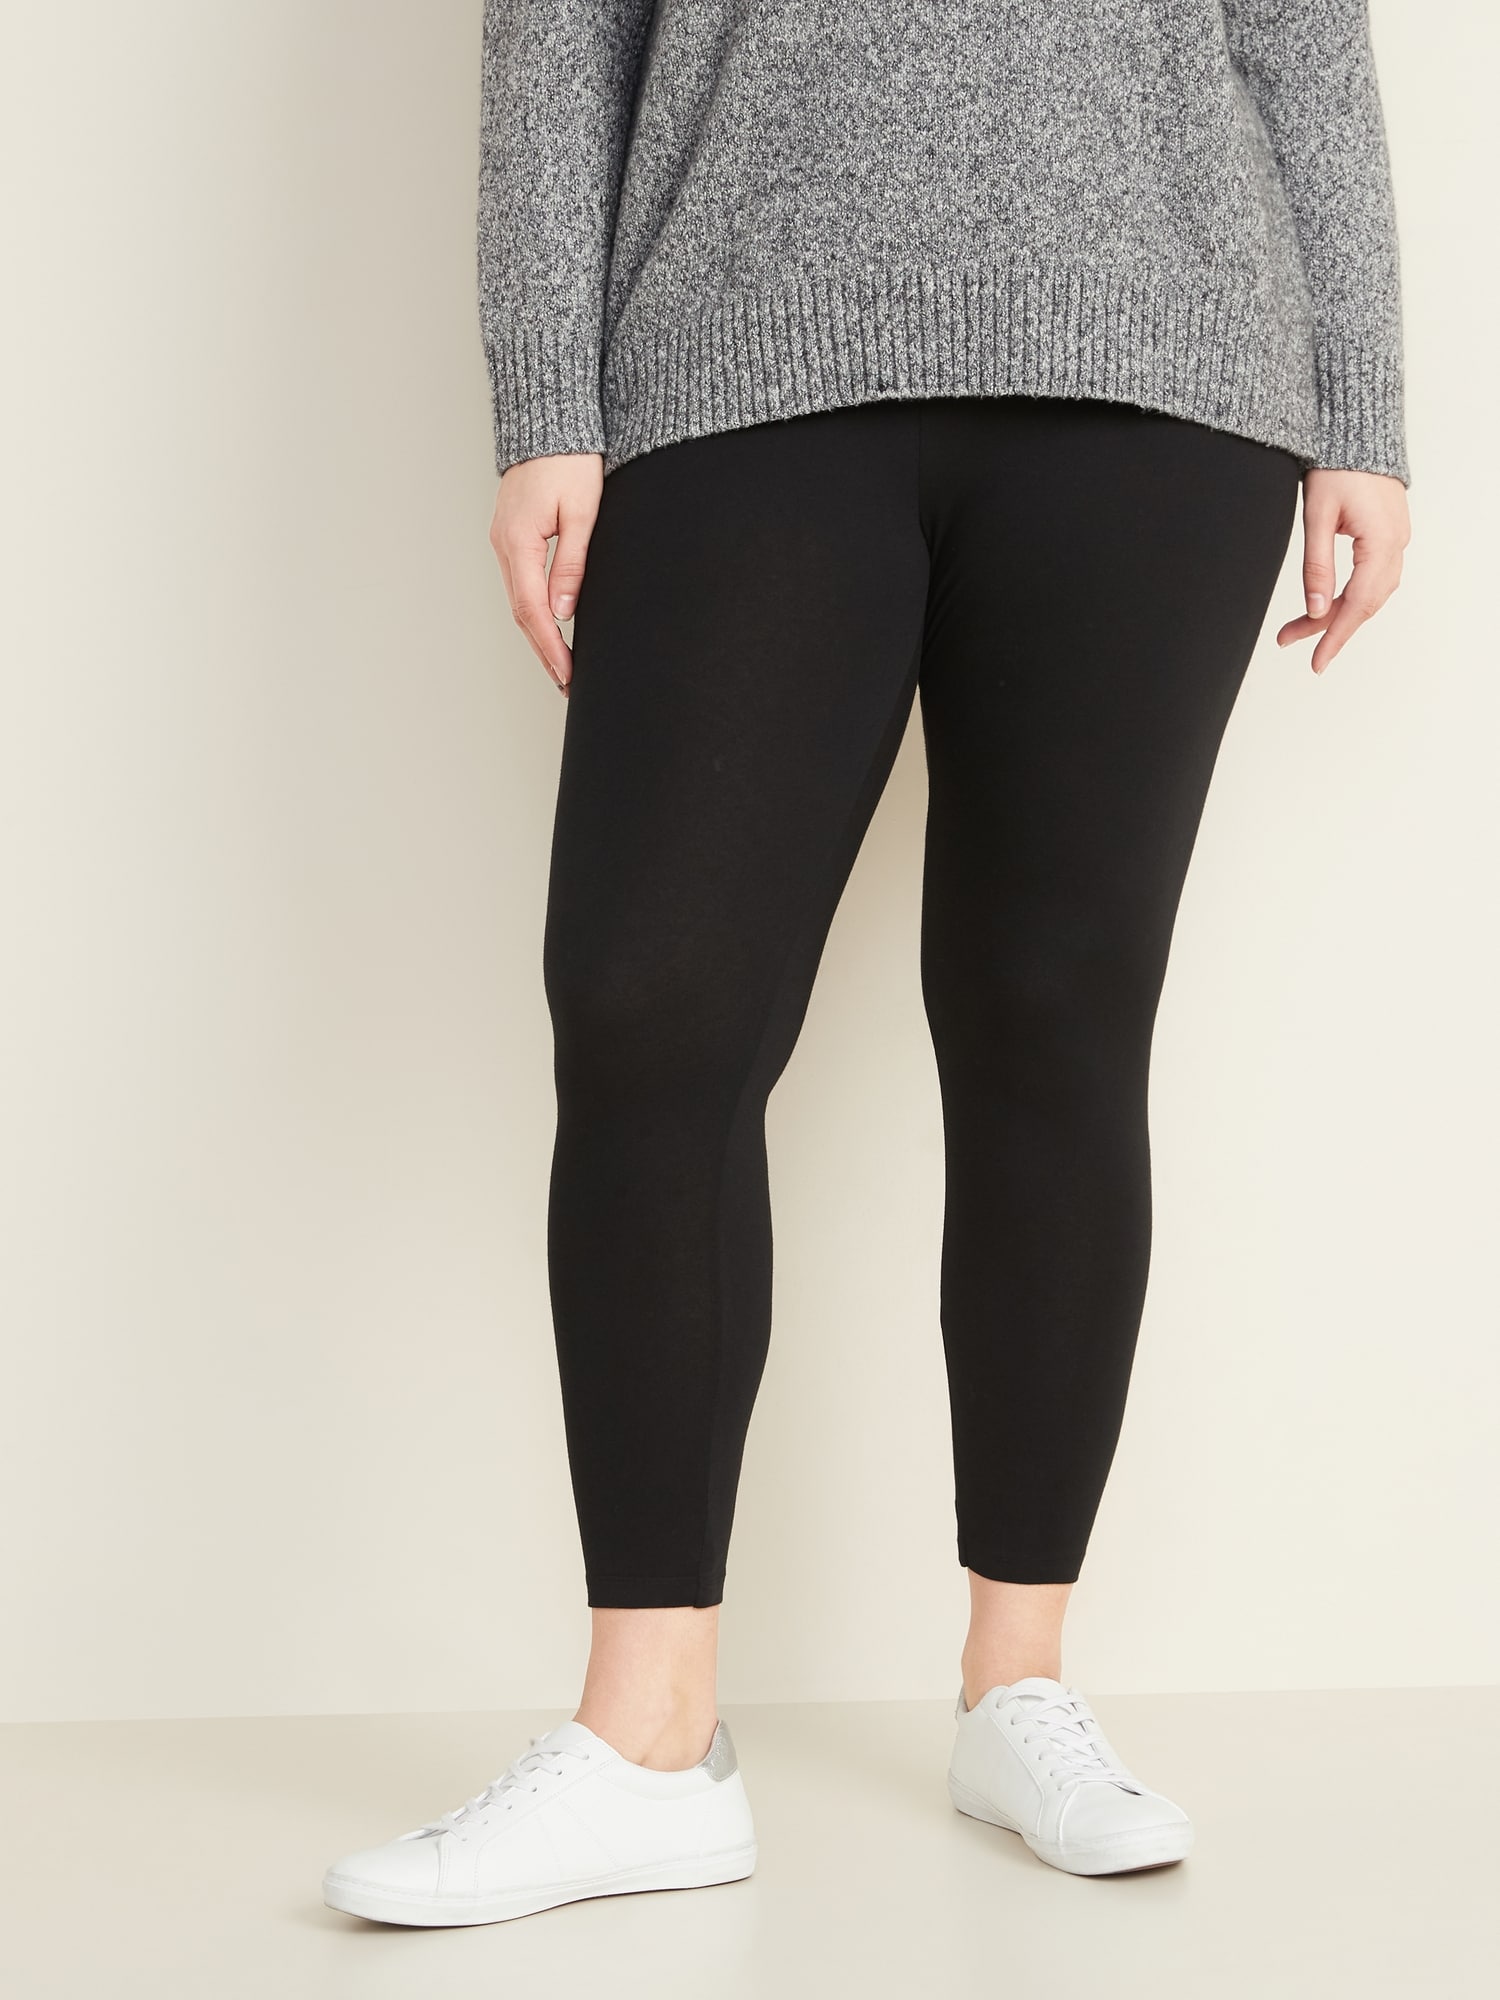 Old Navy Tall Leggings Black Size L - $12 - From Madison